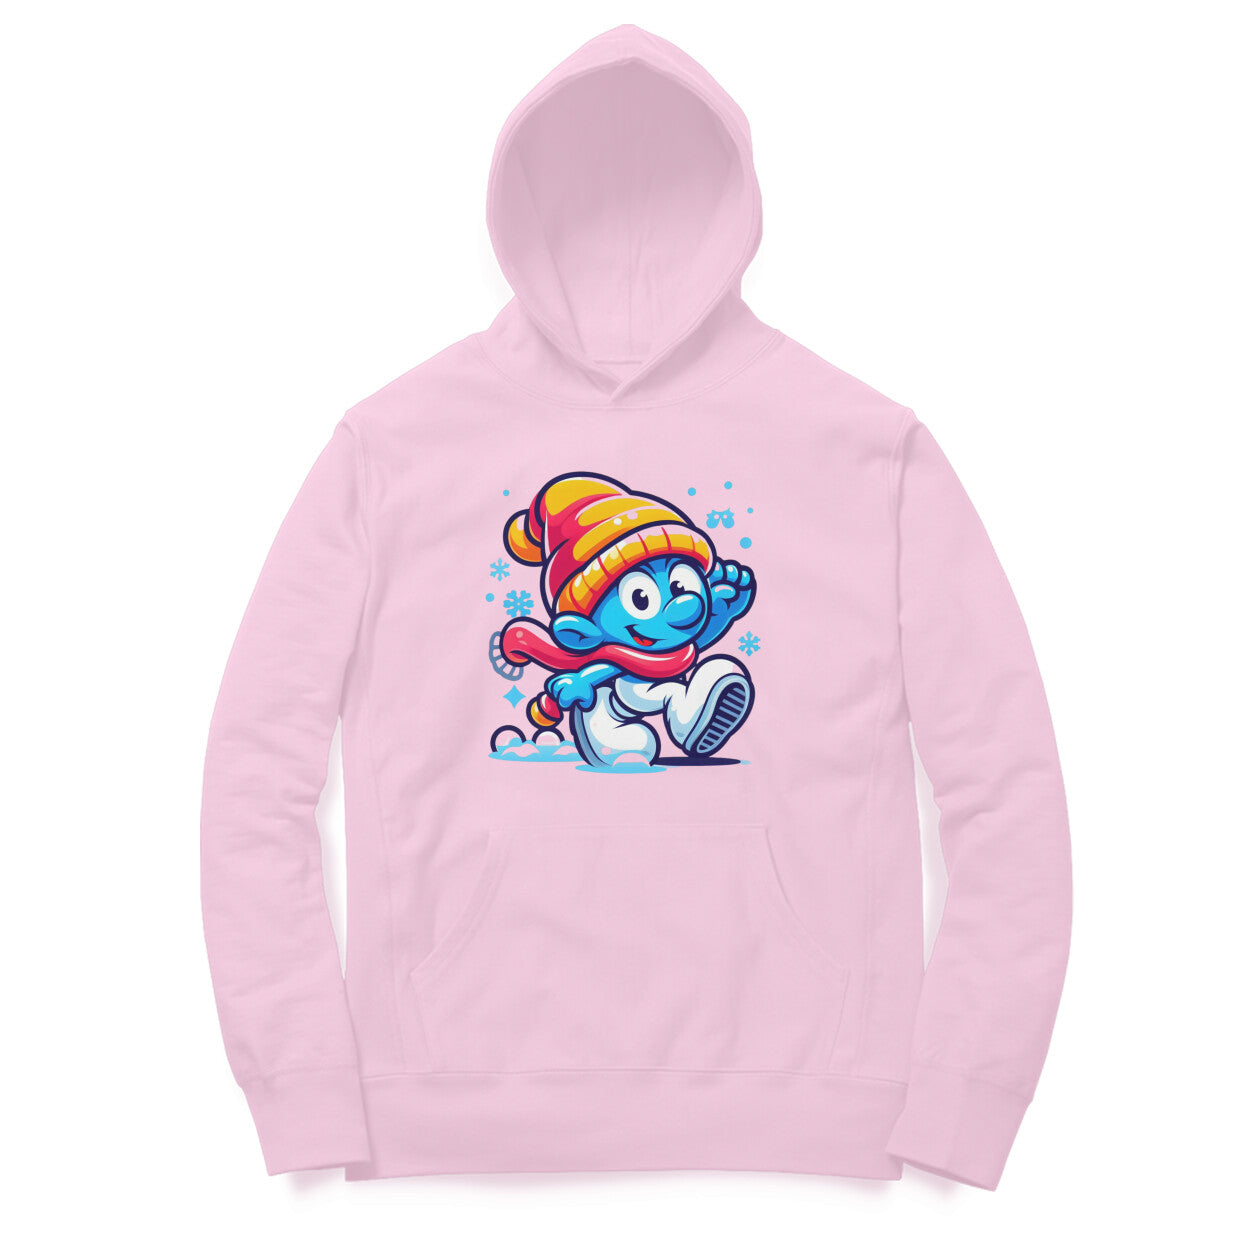 Smurf-themed Unisex Printed Hoodie - Playful and Stylish Design